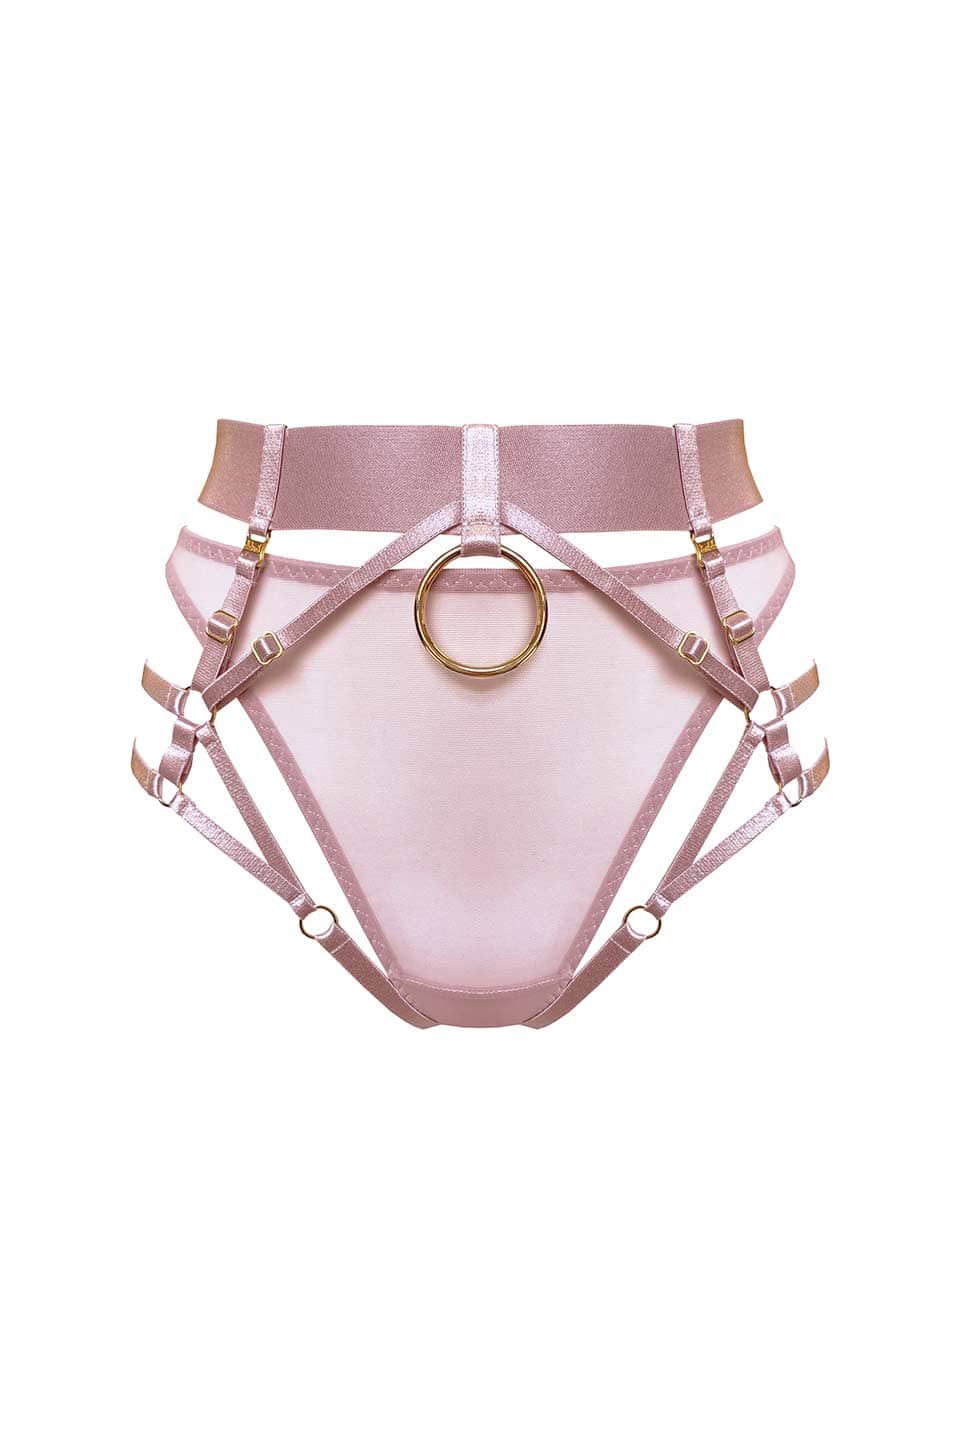 Thumbnail for Product gallery 1, Atelier bordelle kora multi style harness brief without thong rose front